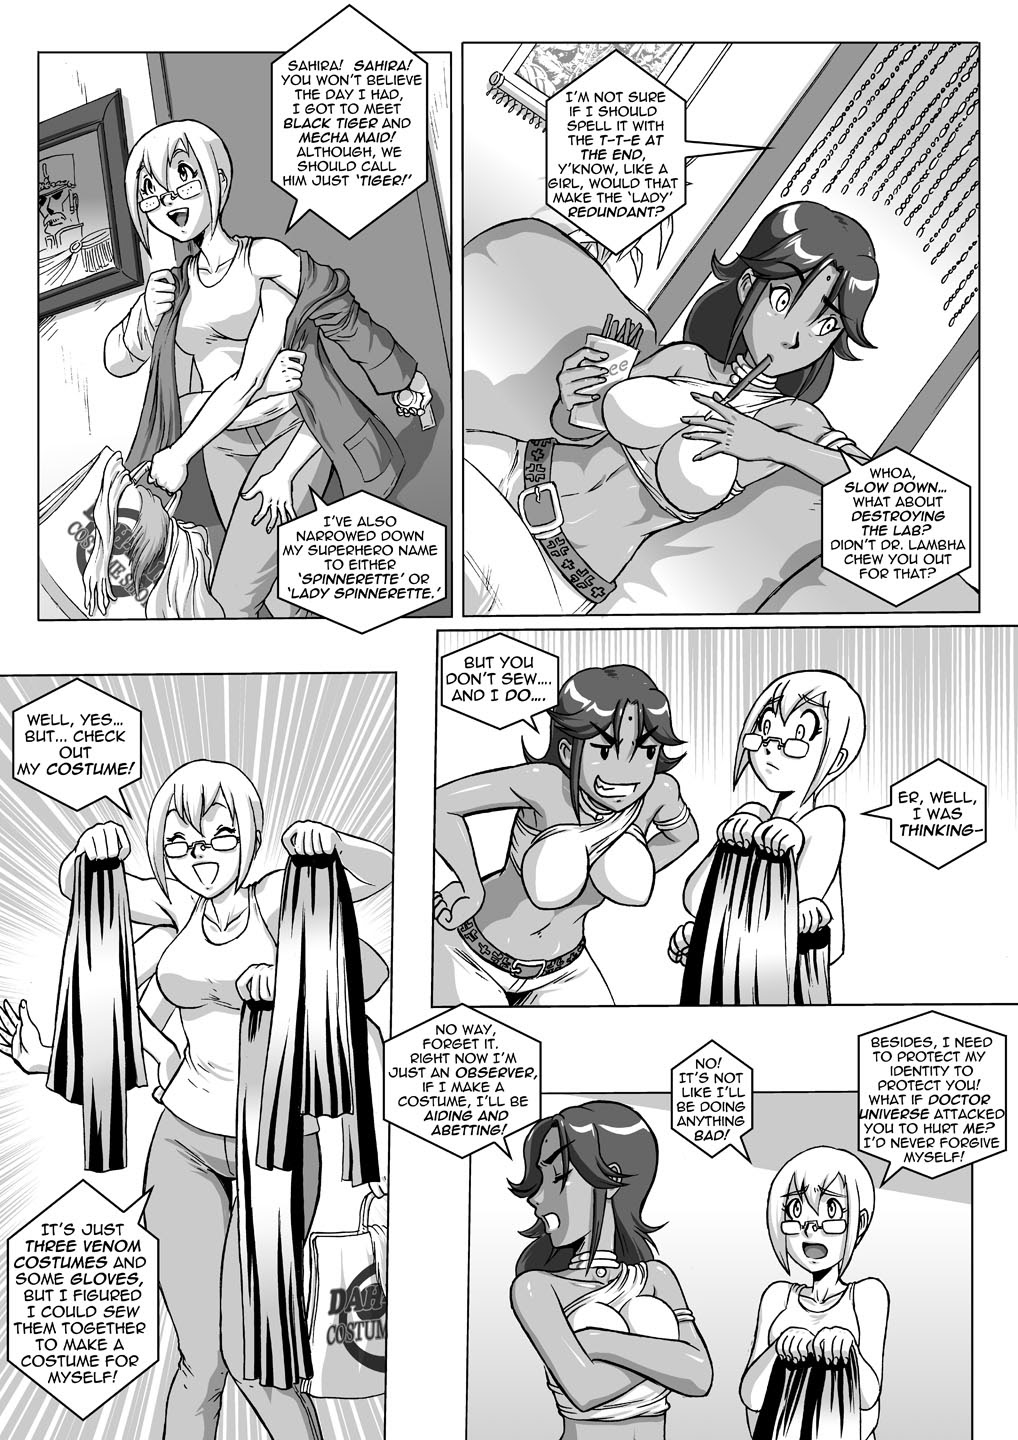 Read online Spinnerette comic -  Issue #1 - 17